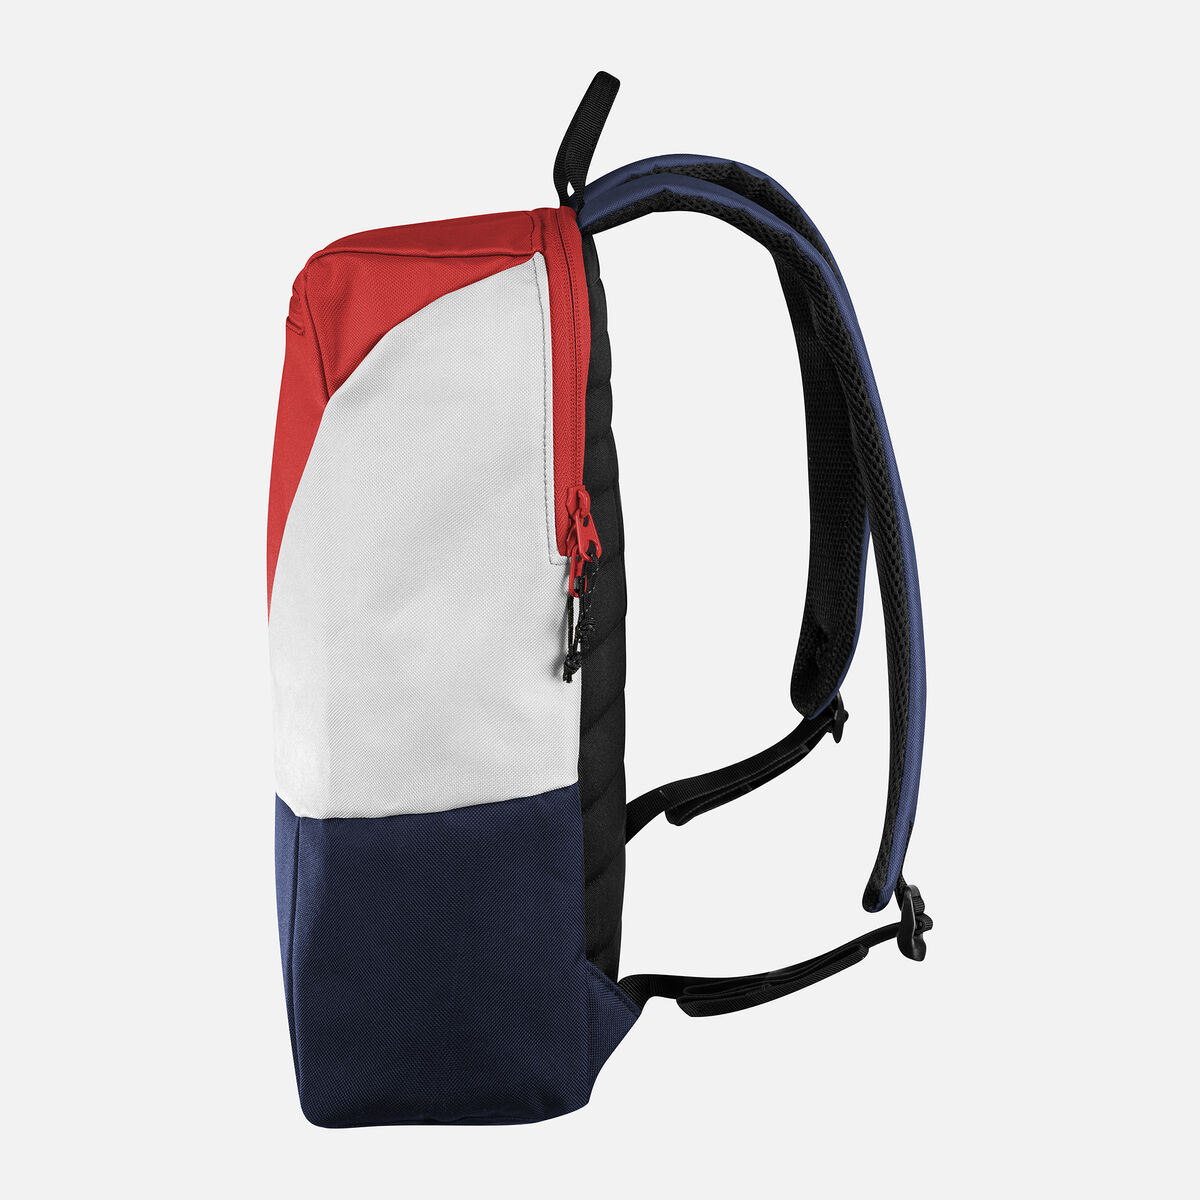 Back to the Games 14L Rucksack